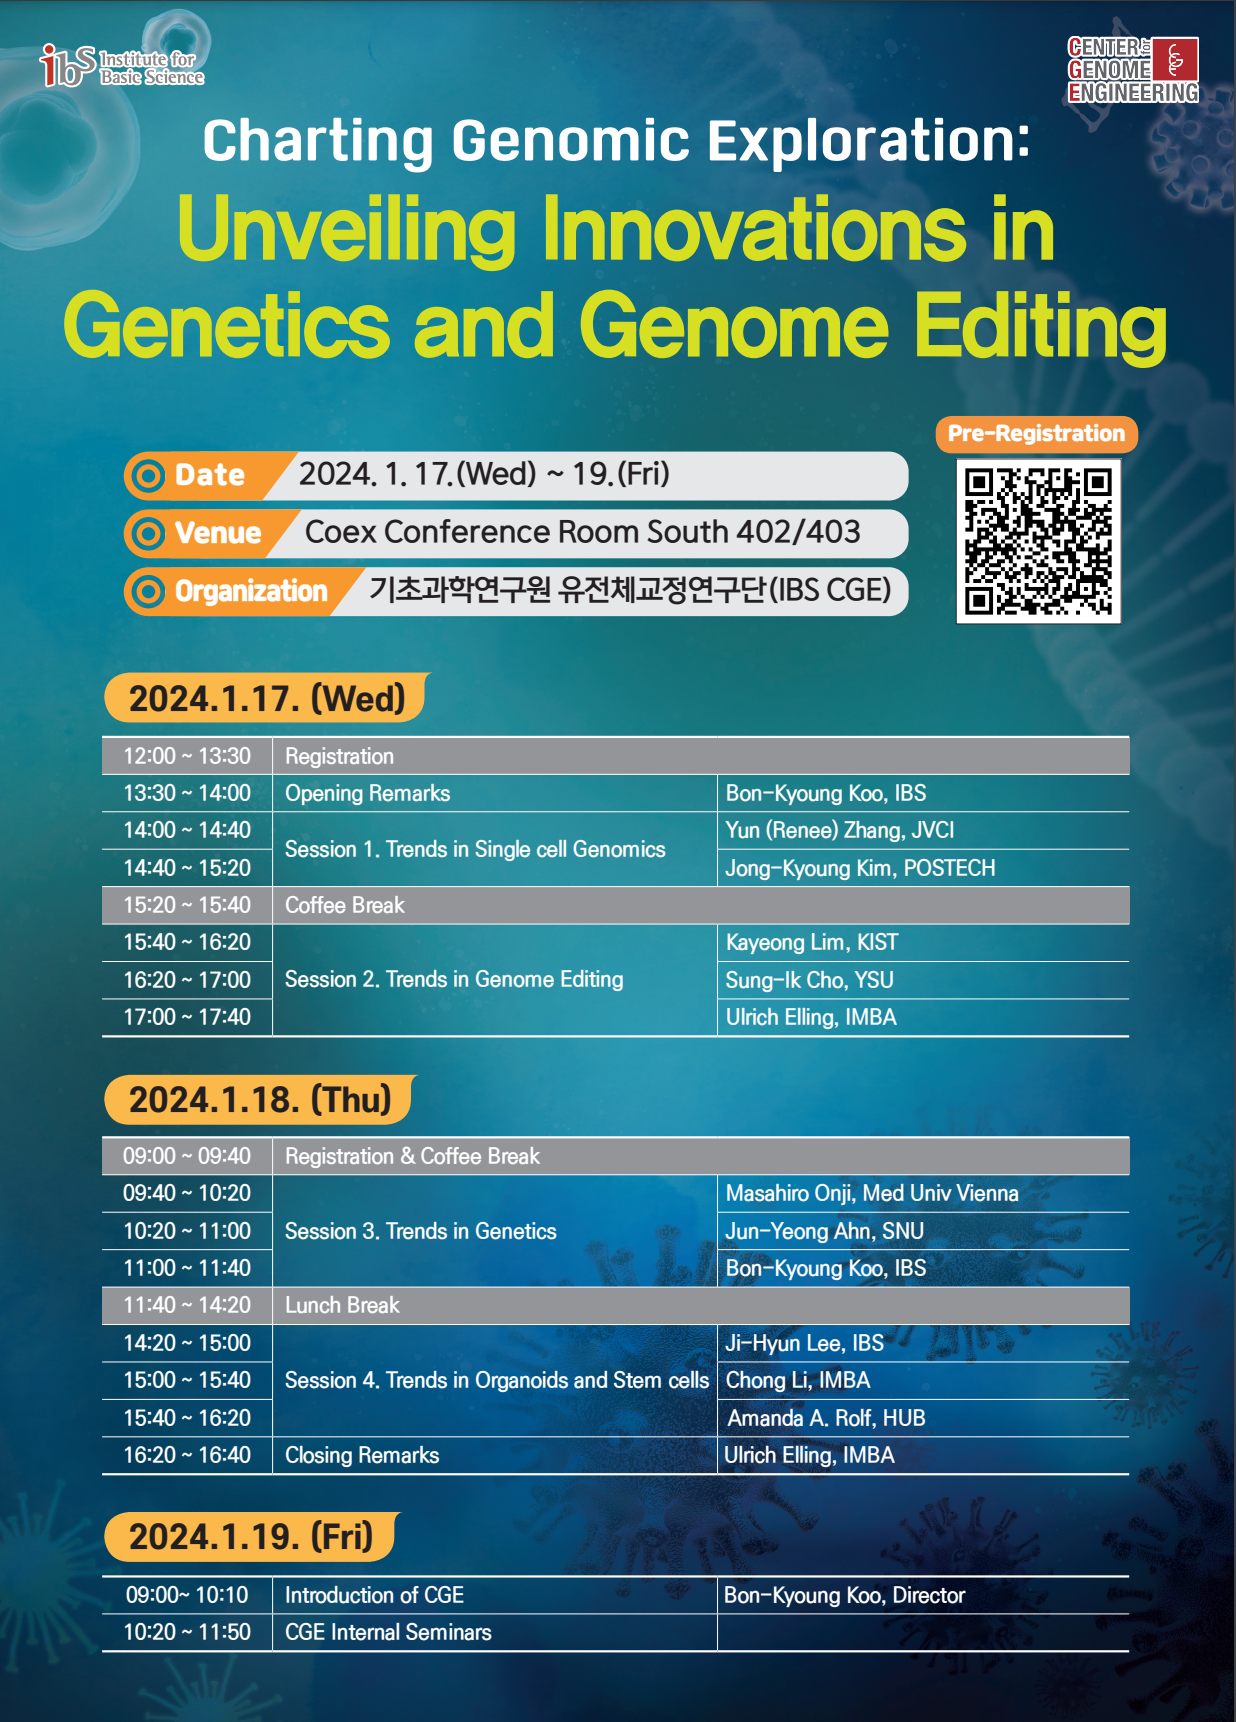 2nd Charting Genomic Exploration: Unveiling Innovations in Genetics and Genome Editing image